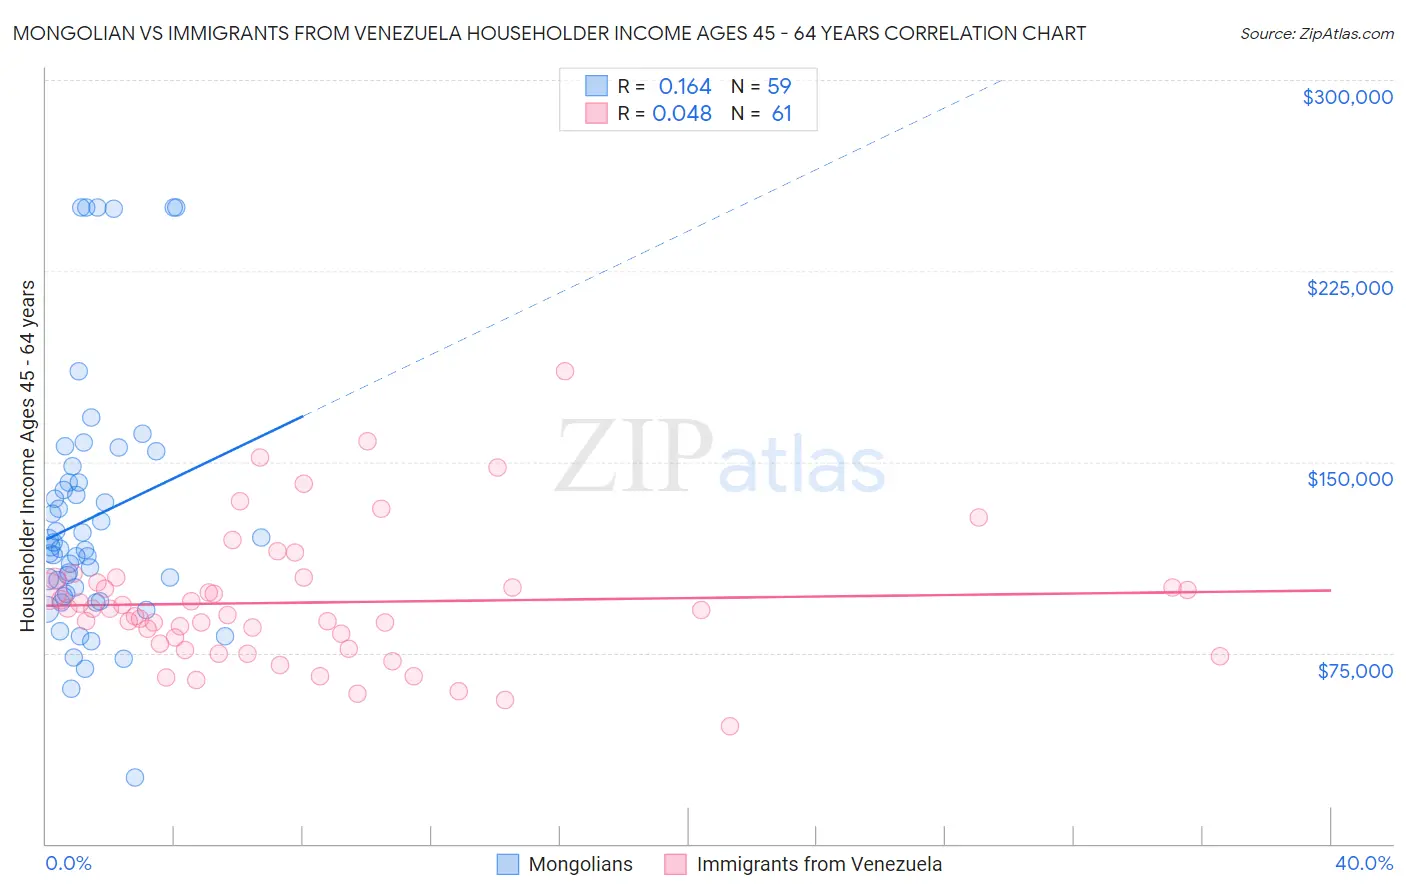 Mongolian vs Immigrants from Venezuela Householder Income Ages 45 - 64 years